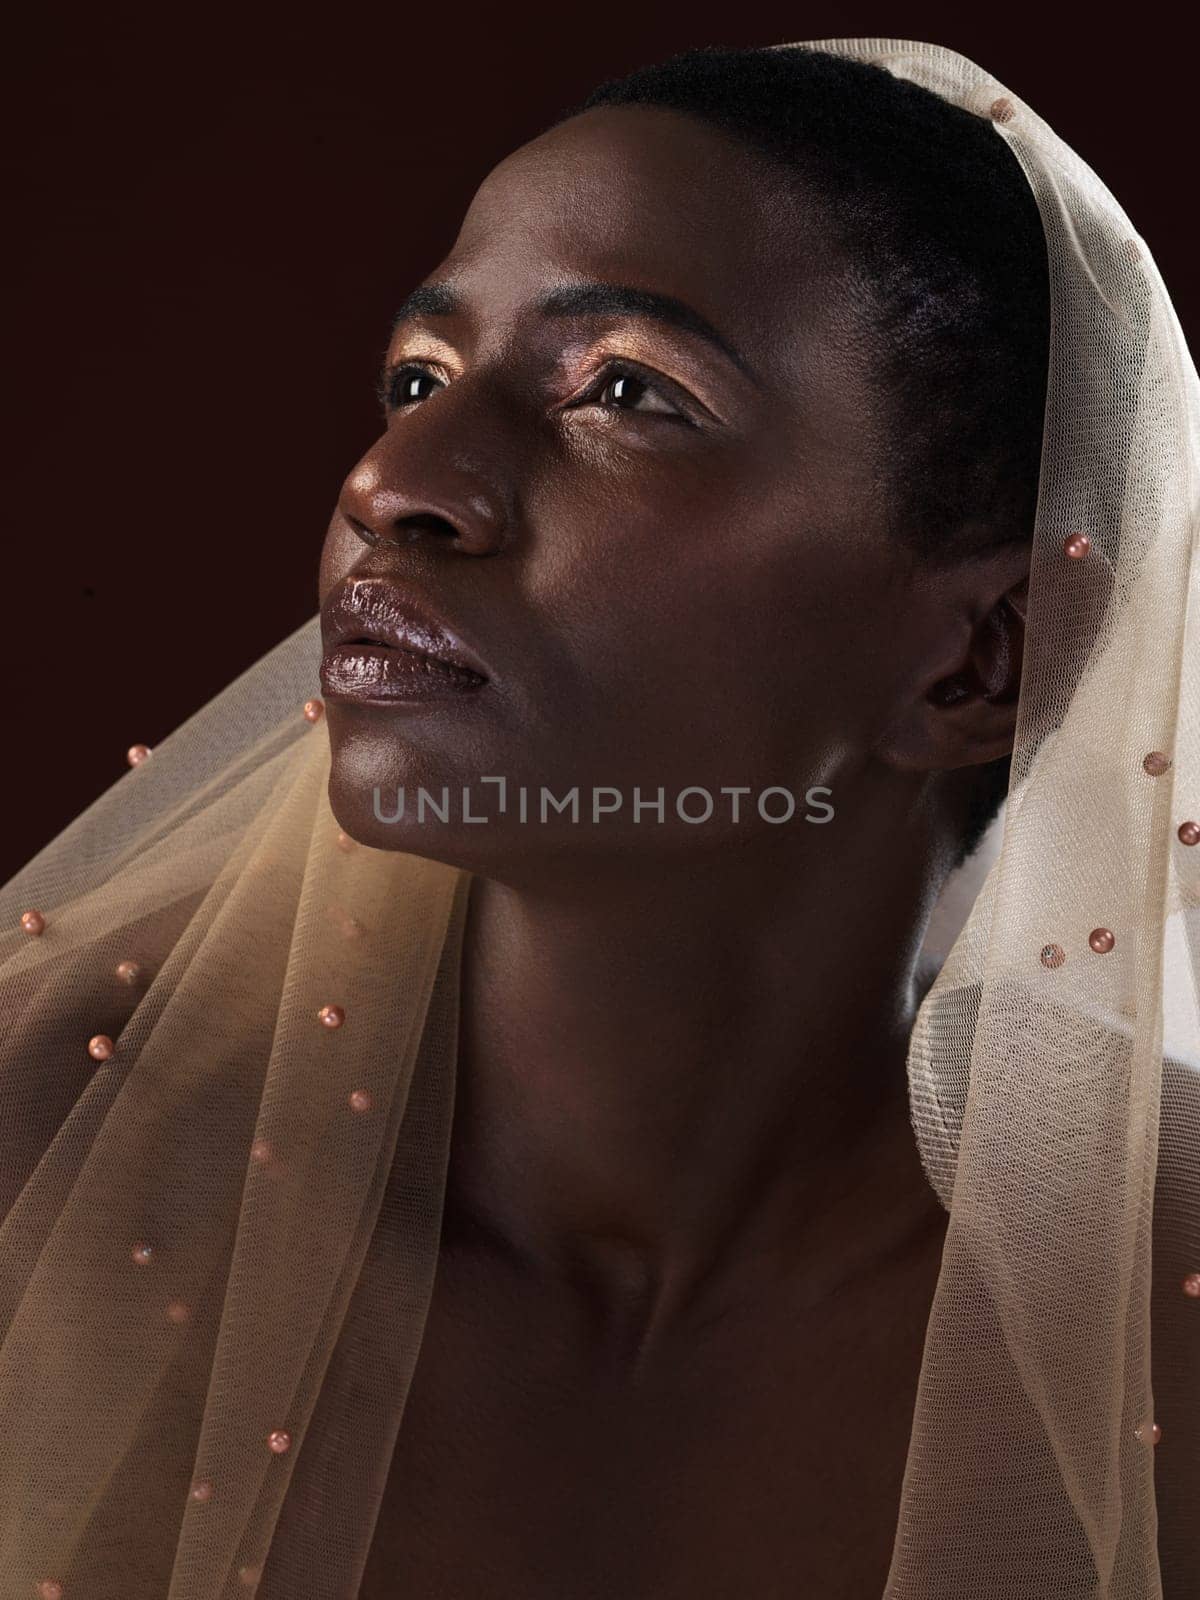 African, fashion or woman thinking of makeup, scarf or confidence glow in studio on black background. Editorial, face or model with traditional wrap, eyeshadow cosmetics or skincare beauty in Ghana.